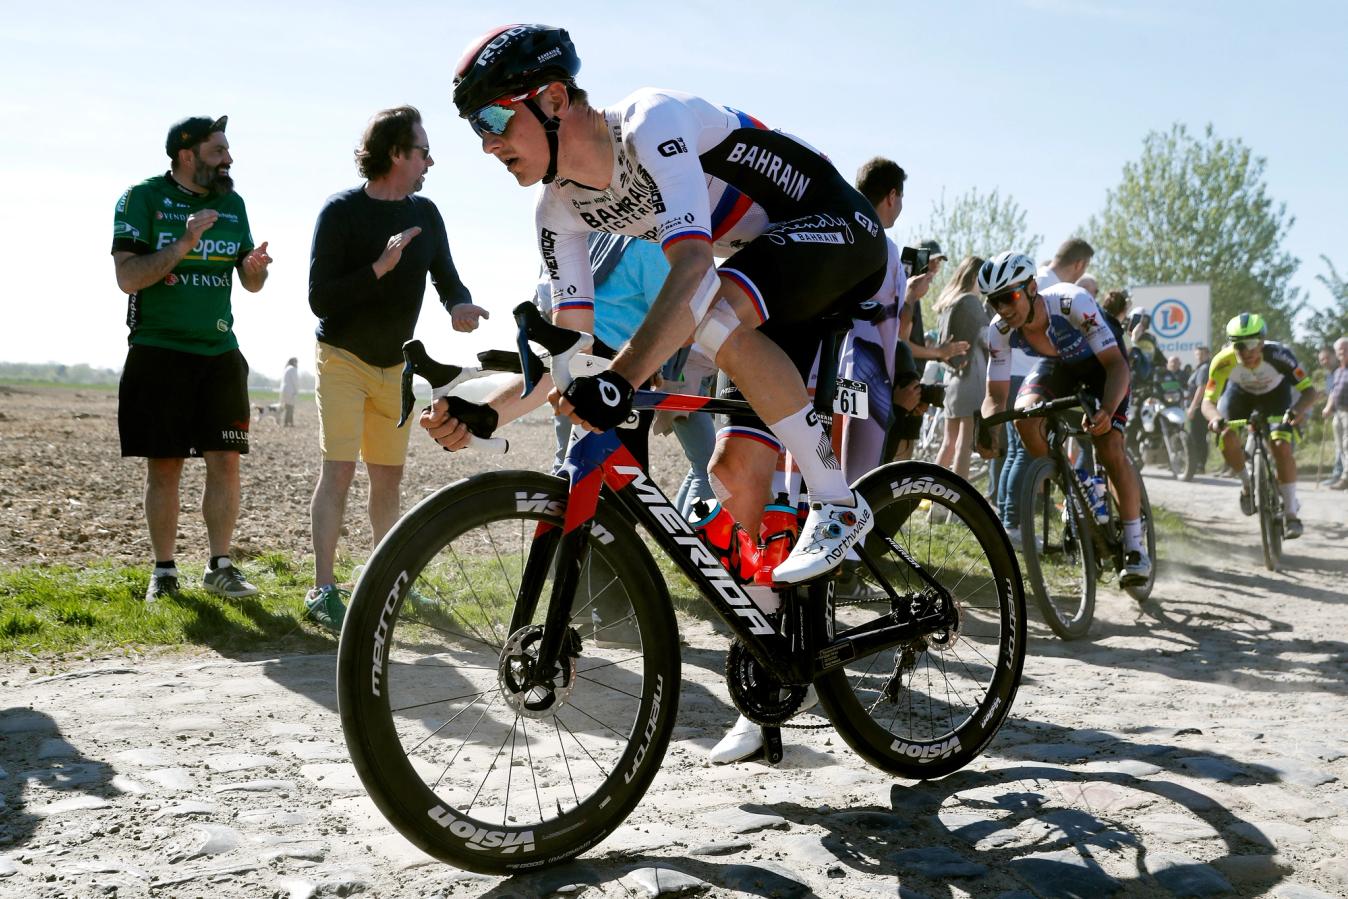 Matej Mohorič was one of the favourites riding the 2022 Paris-Roubaix on 32mm tyres